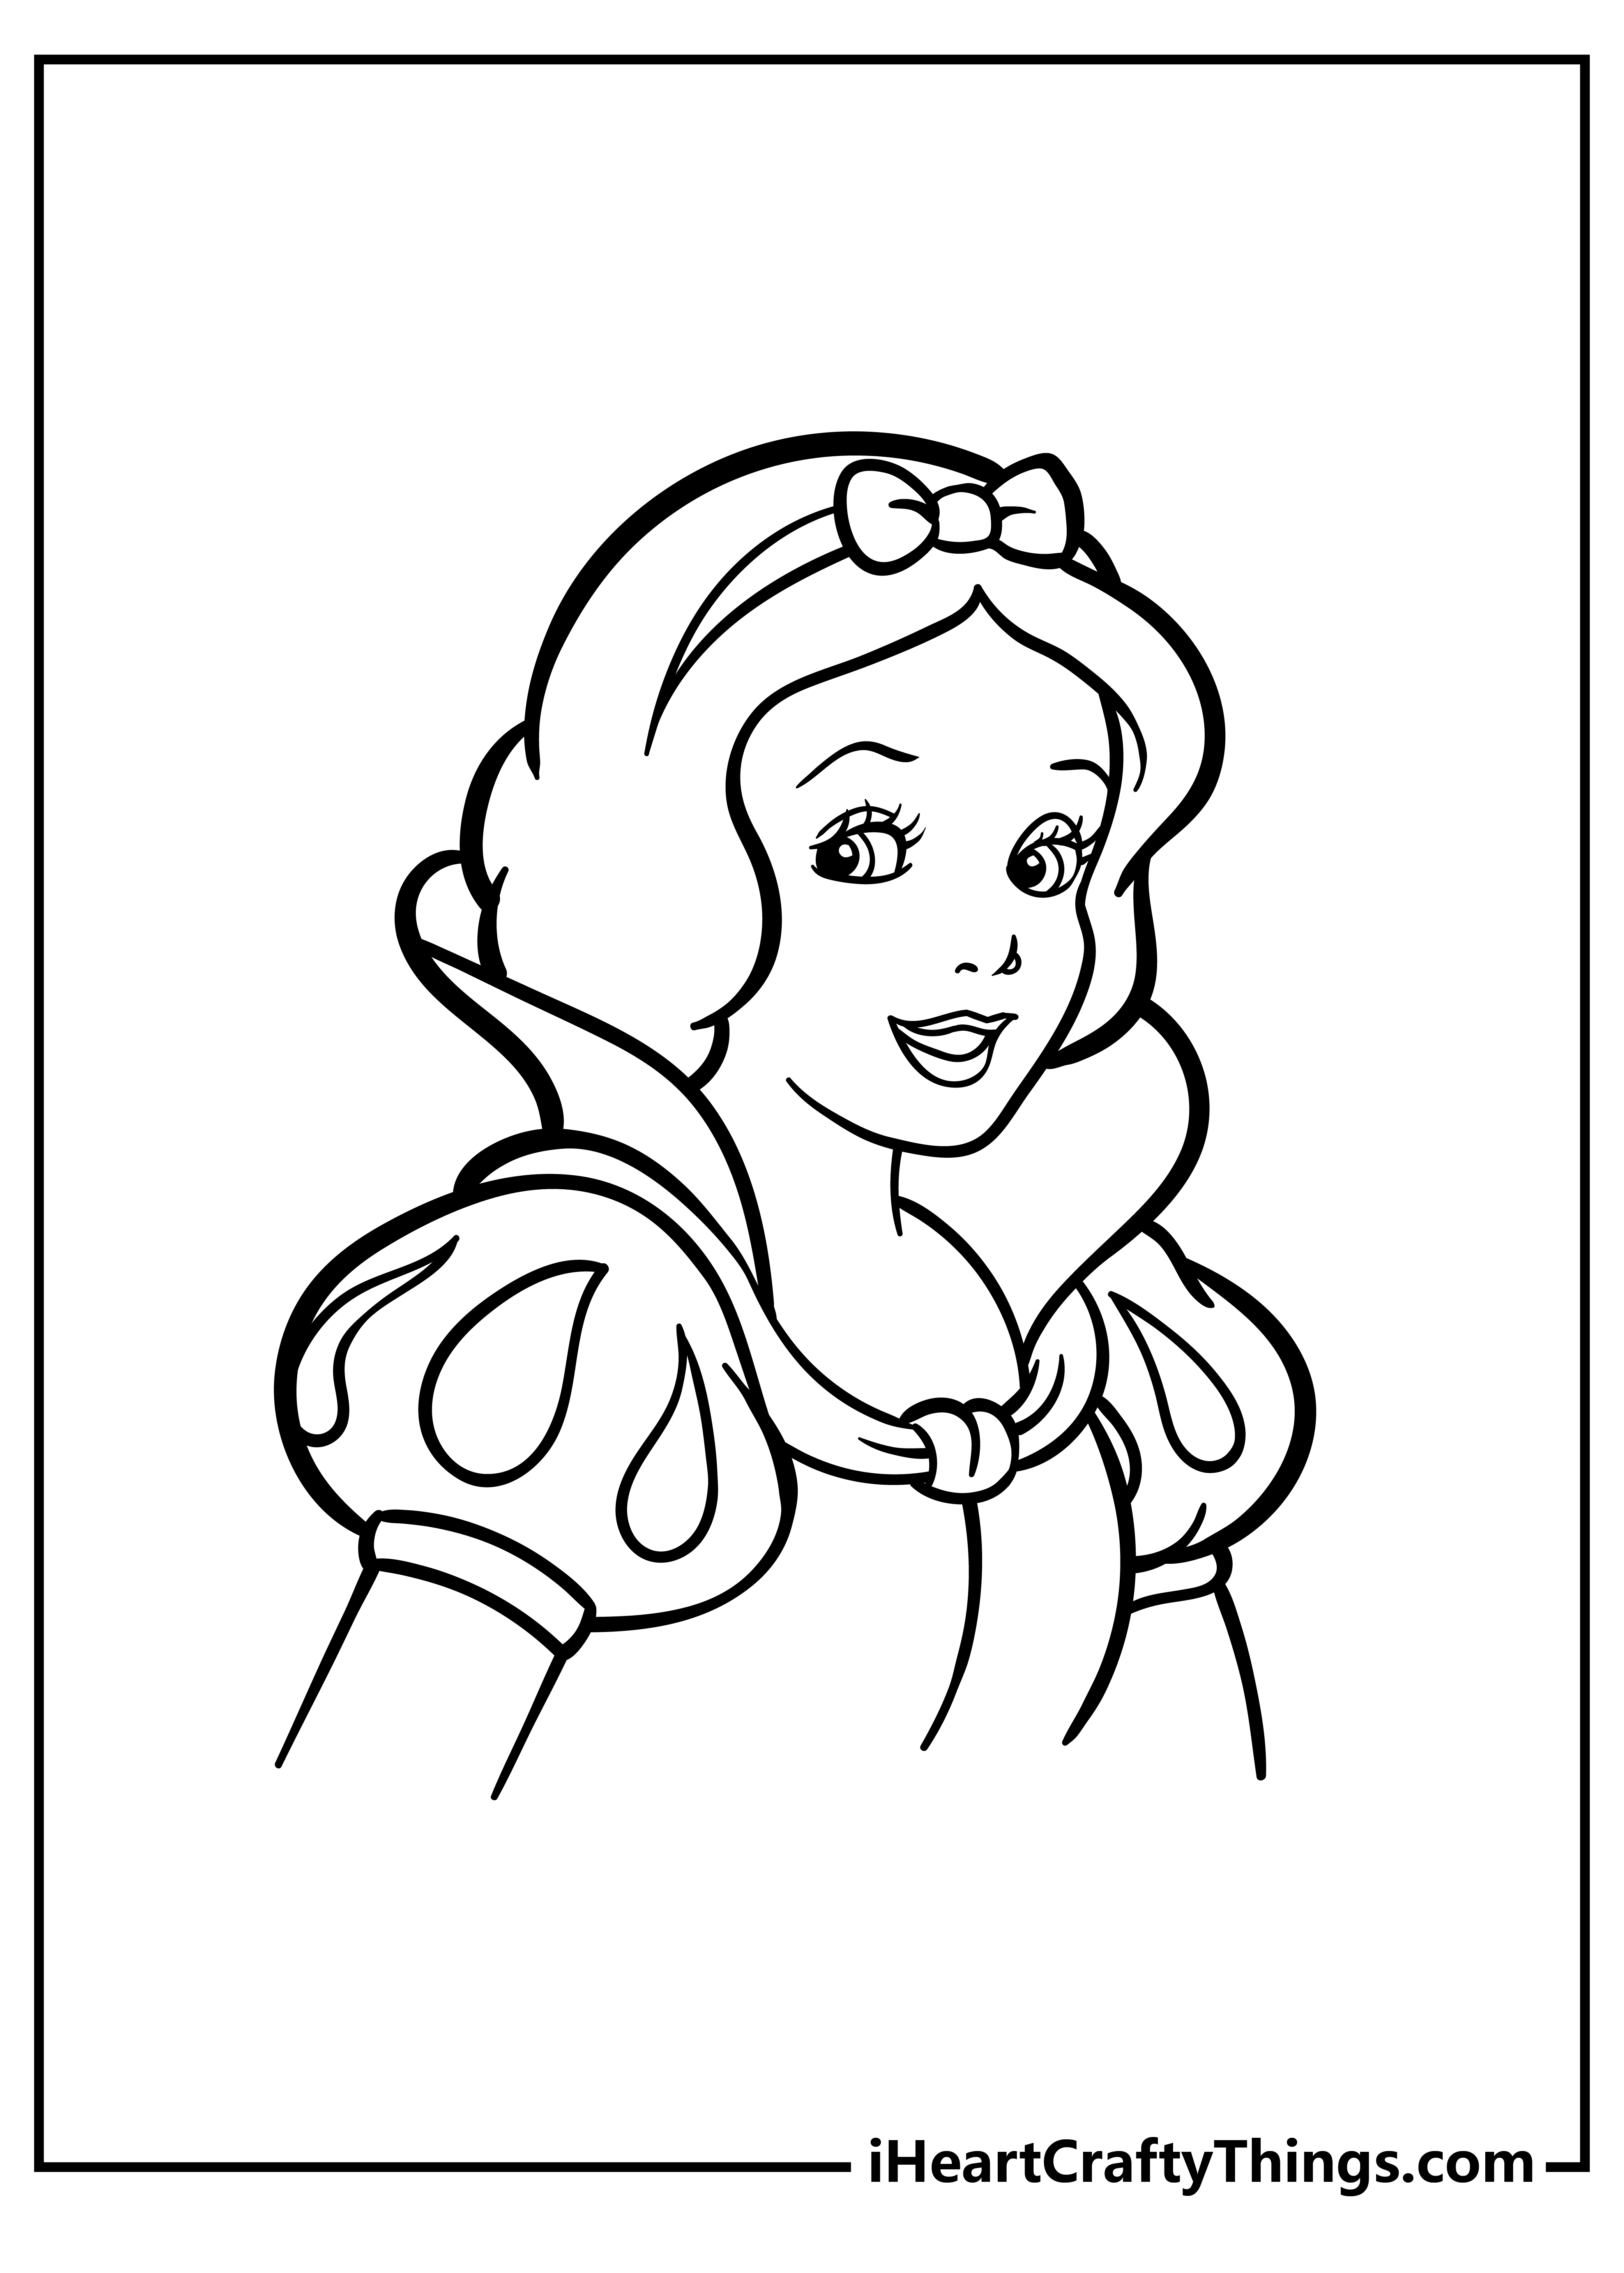 Printable Snow White Coloring Pages (Updated 2022)